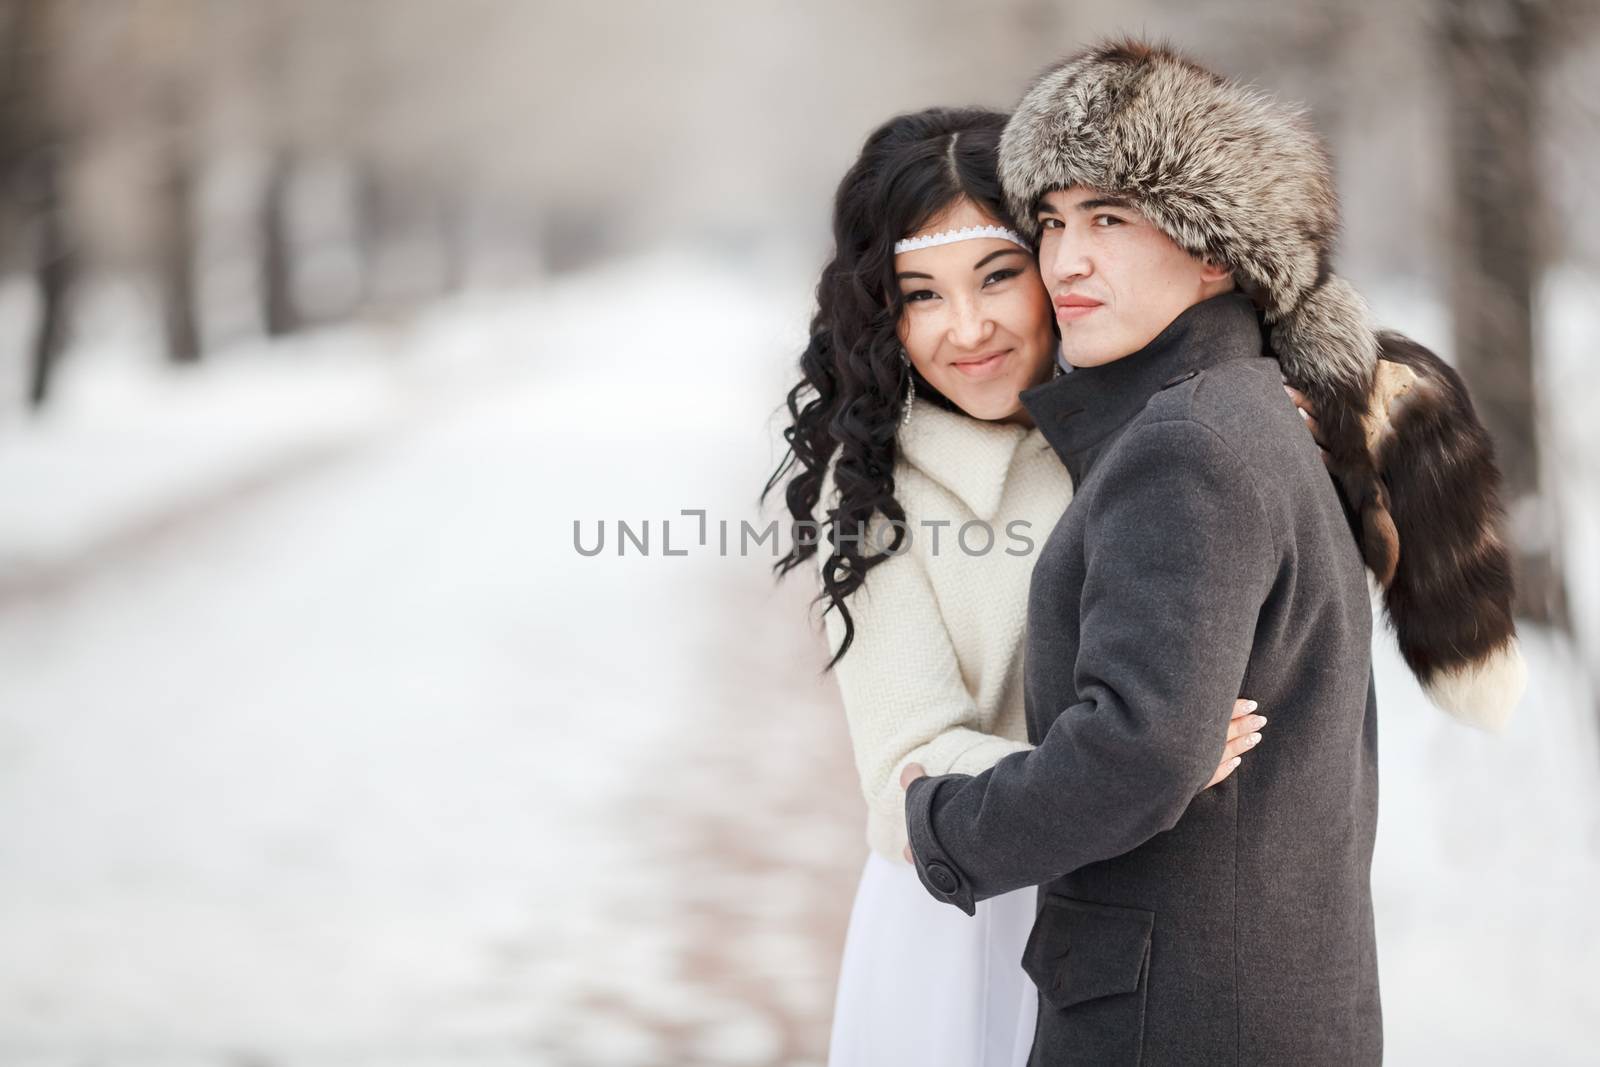 Beautiful wedding couple, exotic asian bride and groom embraced. Young man in winter coat and fur hat, bride in white wedding dress with sheepskin veil. Cold season warm clothing, copy space for text.